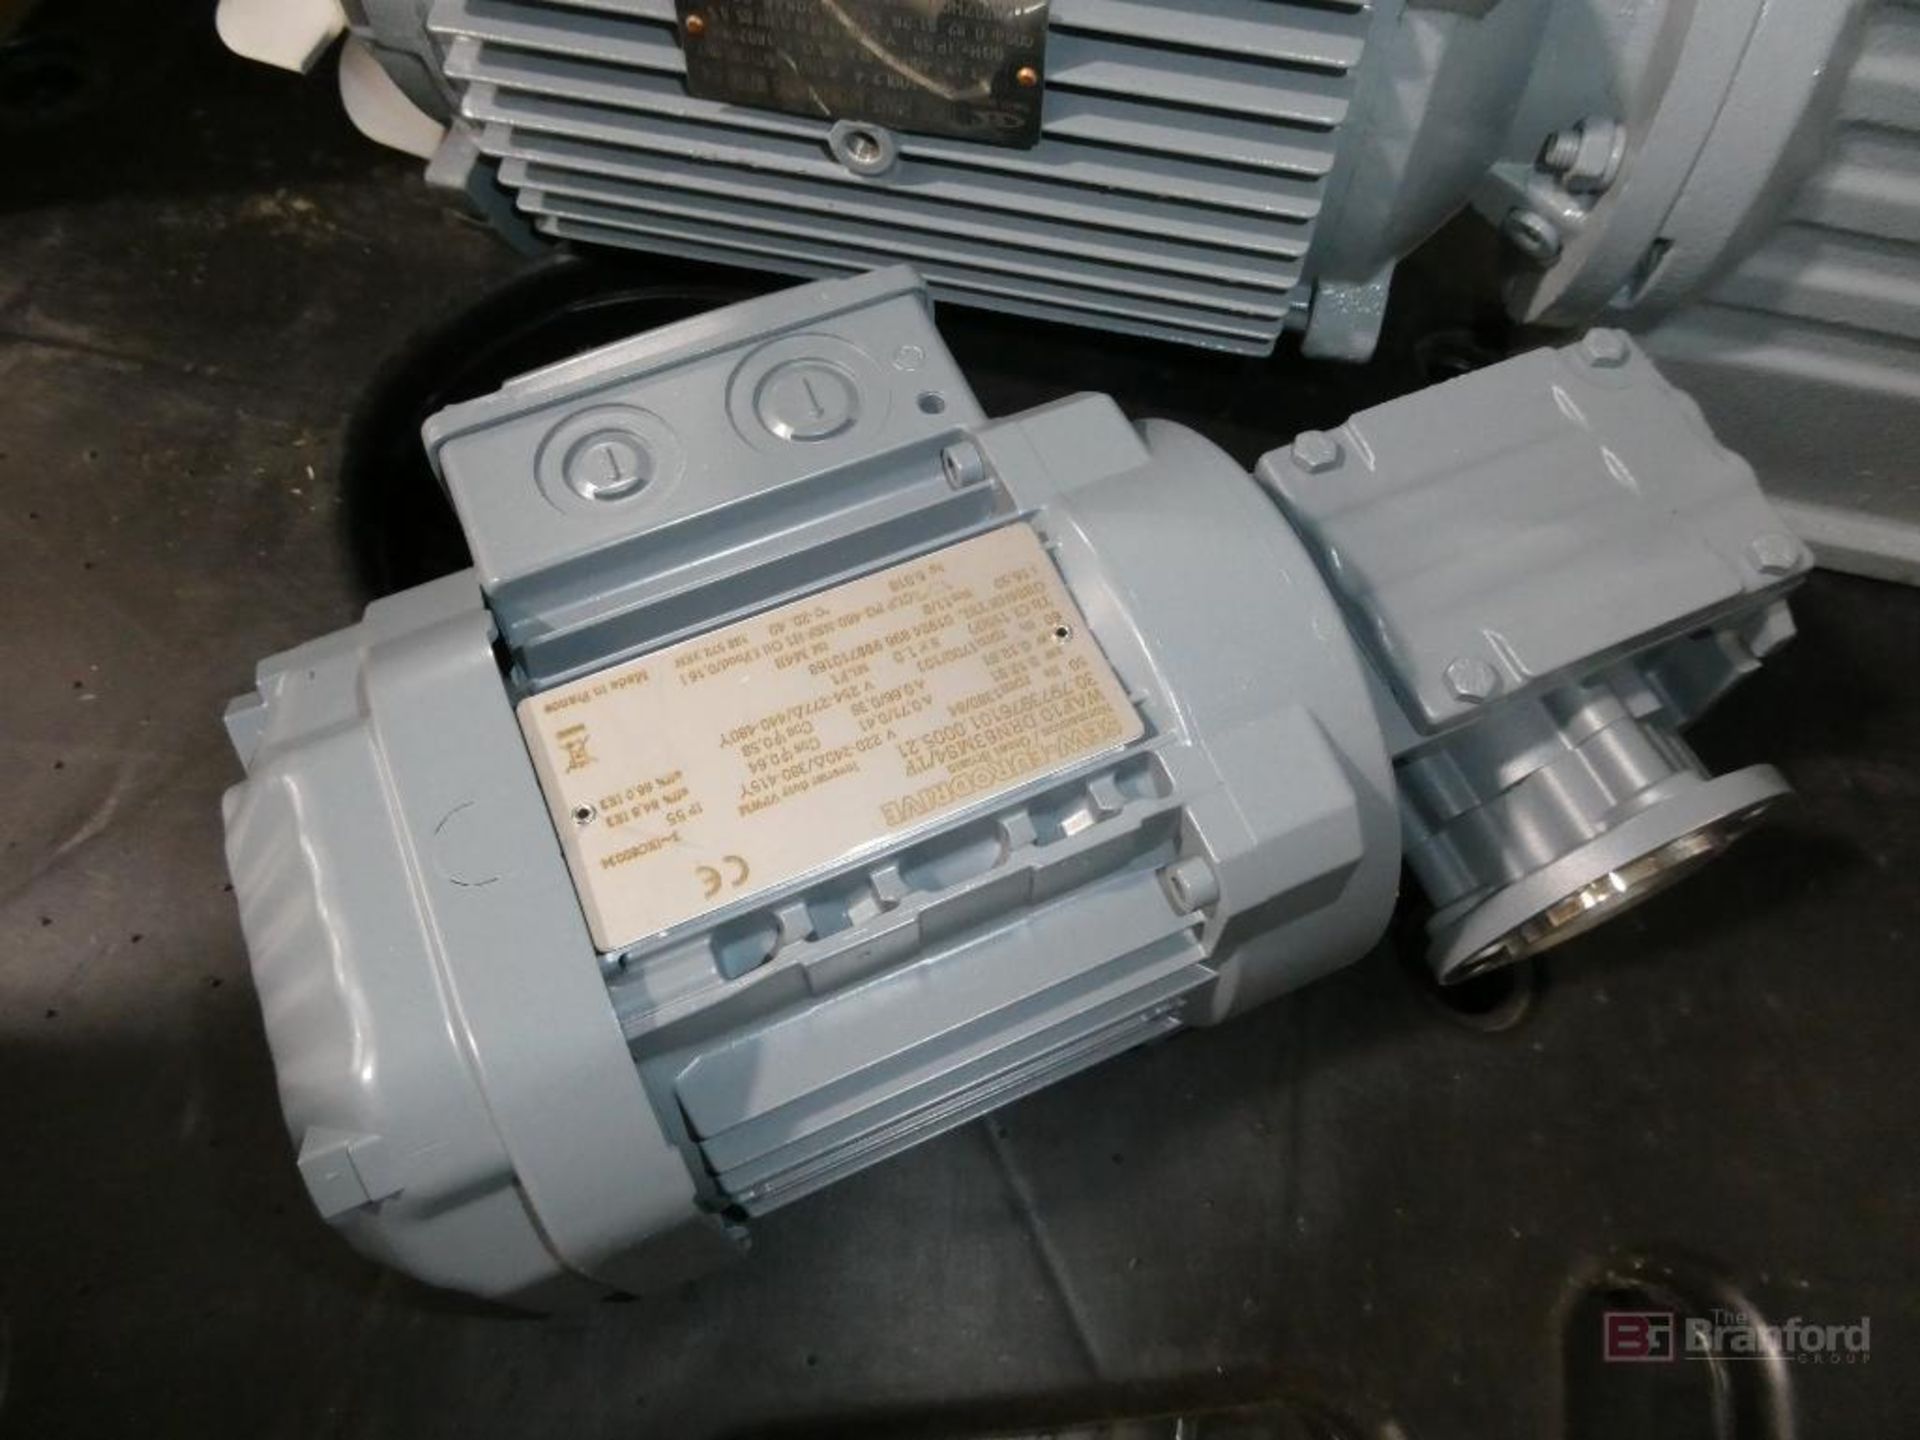 EverGear Model MTJAF67-Y2.2-4P-28-M5A, Gearbox Speed Reducer, Assorted Gear Motors - Image 9 of 10